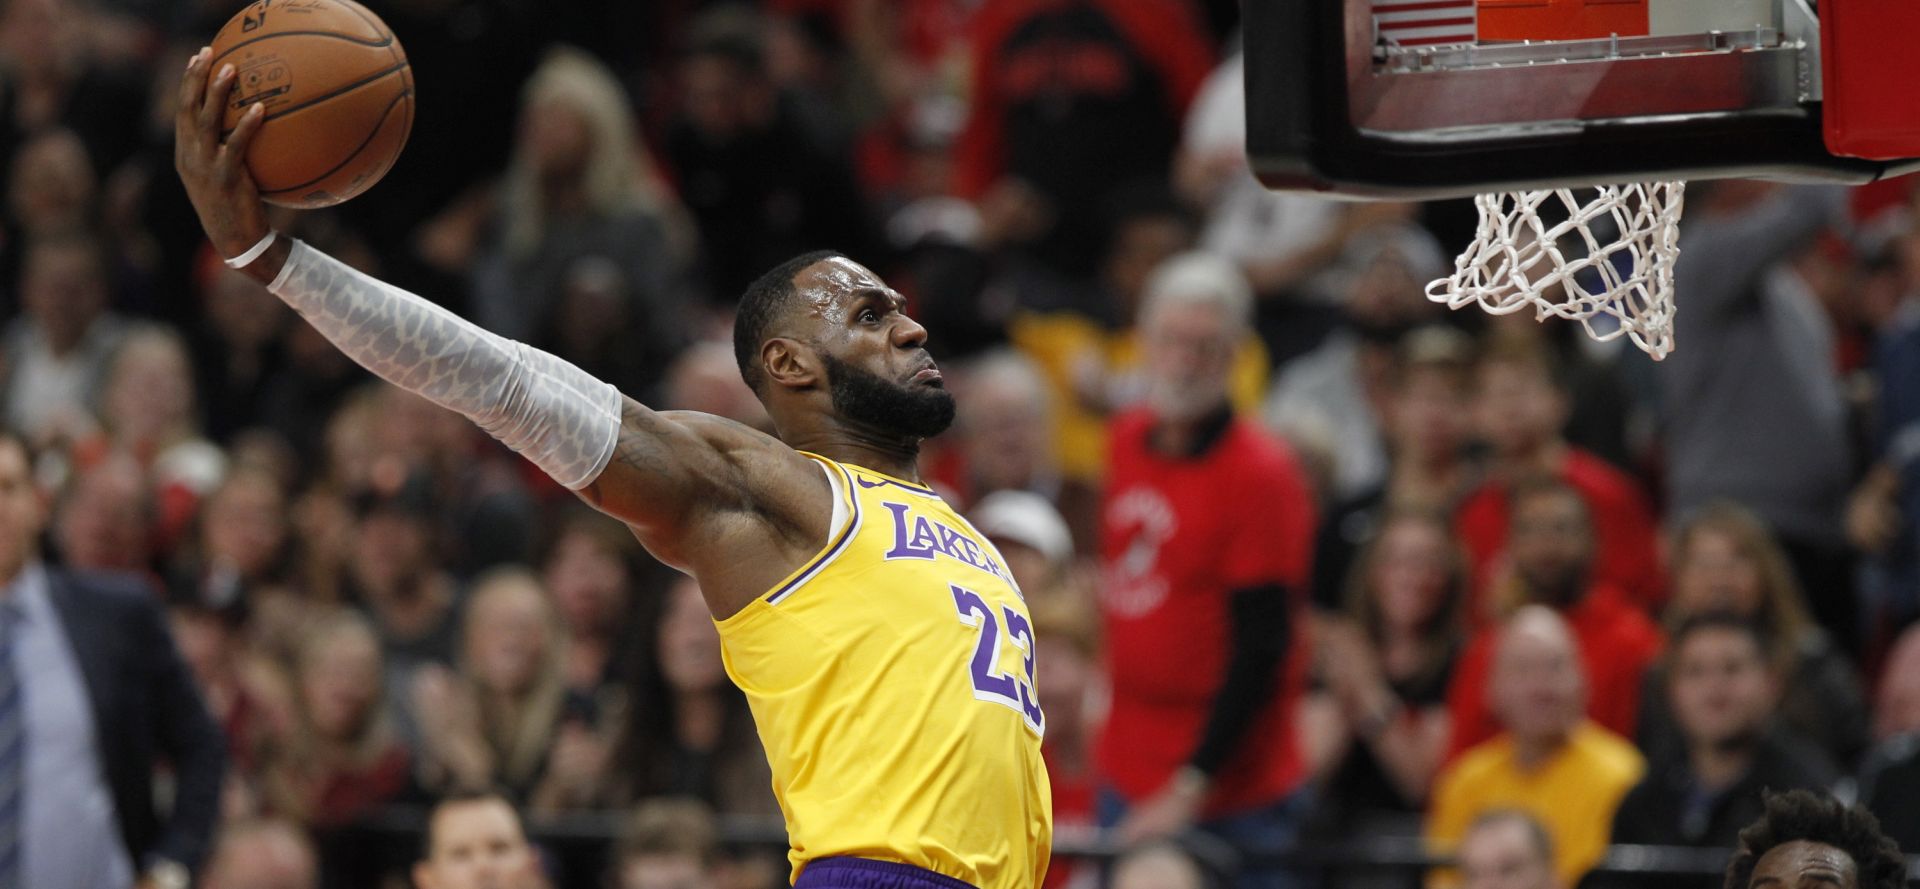 epa07103405 Los Angeles Lakers forward LeBron James goes to the basket for a slam dunk in the first half of the NBA basketball game between the Portland Trail Blazers and the Los Angeles Lakers at the Moda Center in Portland, Oregon, USA, 18 October 2018.  EPA/STEVE DIPAOLA  SHUTTERSTOCK OUT